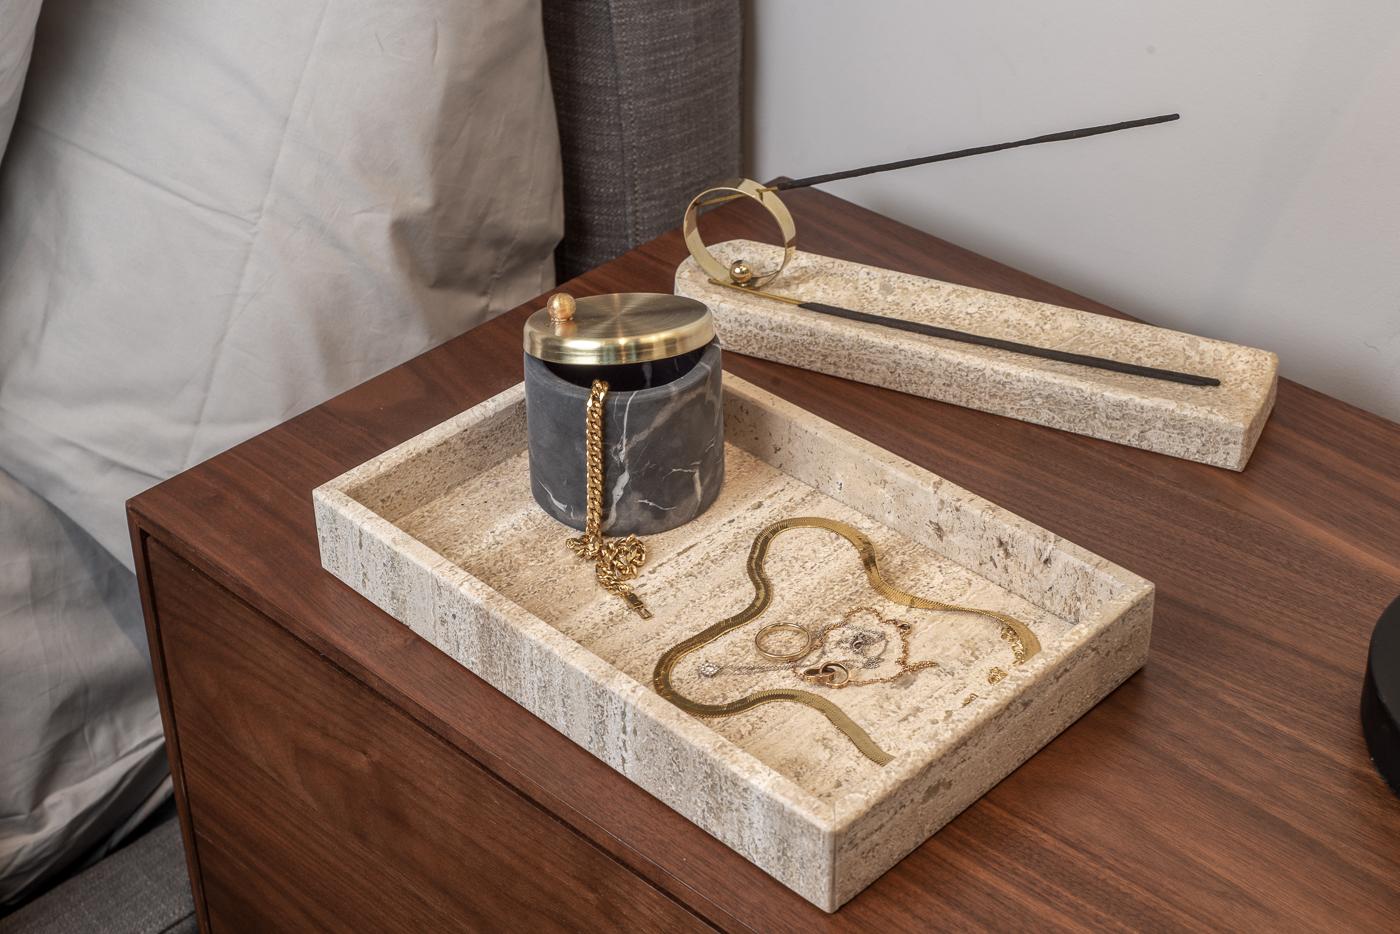 The bruci Halka Incense Burner exudes an air of refined luxury. Its understated design and exquisite details are sure to inspire and captivate, making it the perfect addition to your sanctuary of tranquility and contemplation. The brushed brass